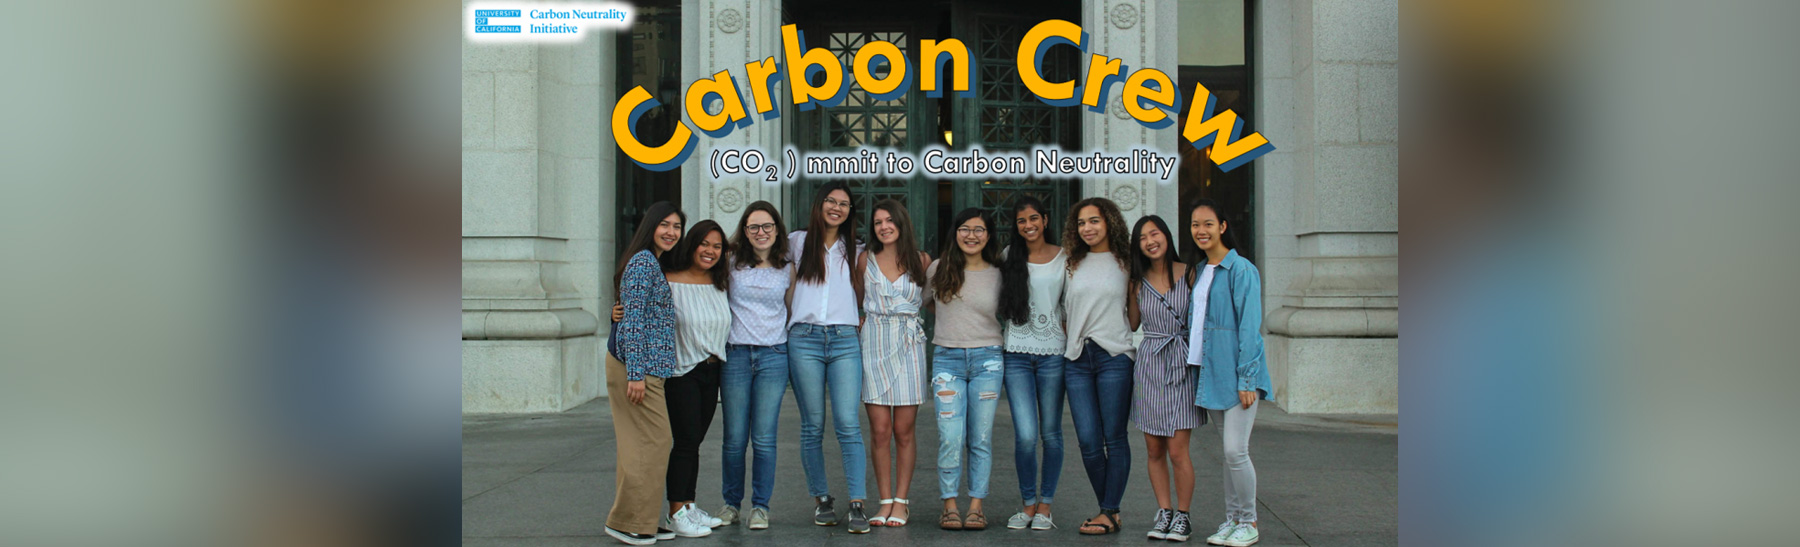 insidepages-header-carbon-crew